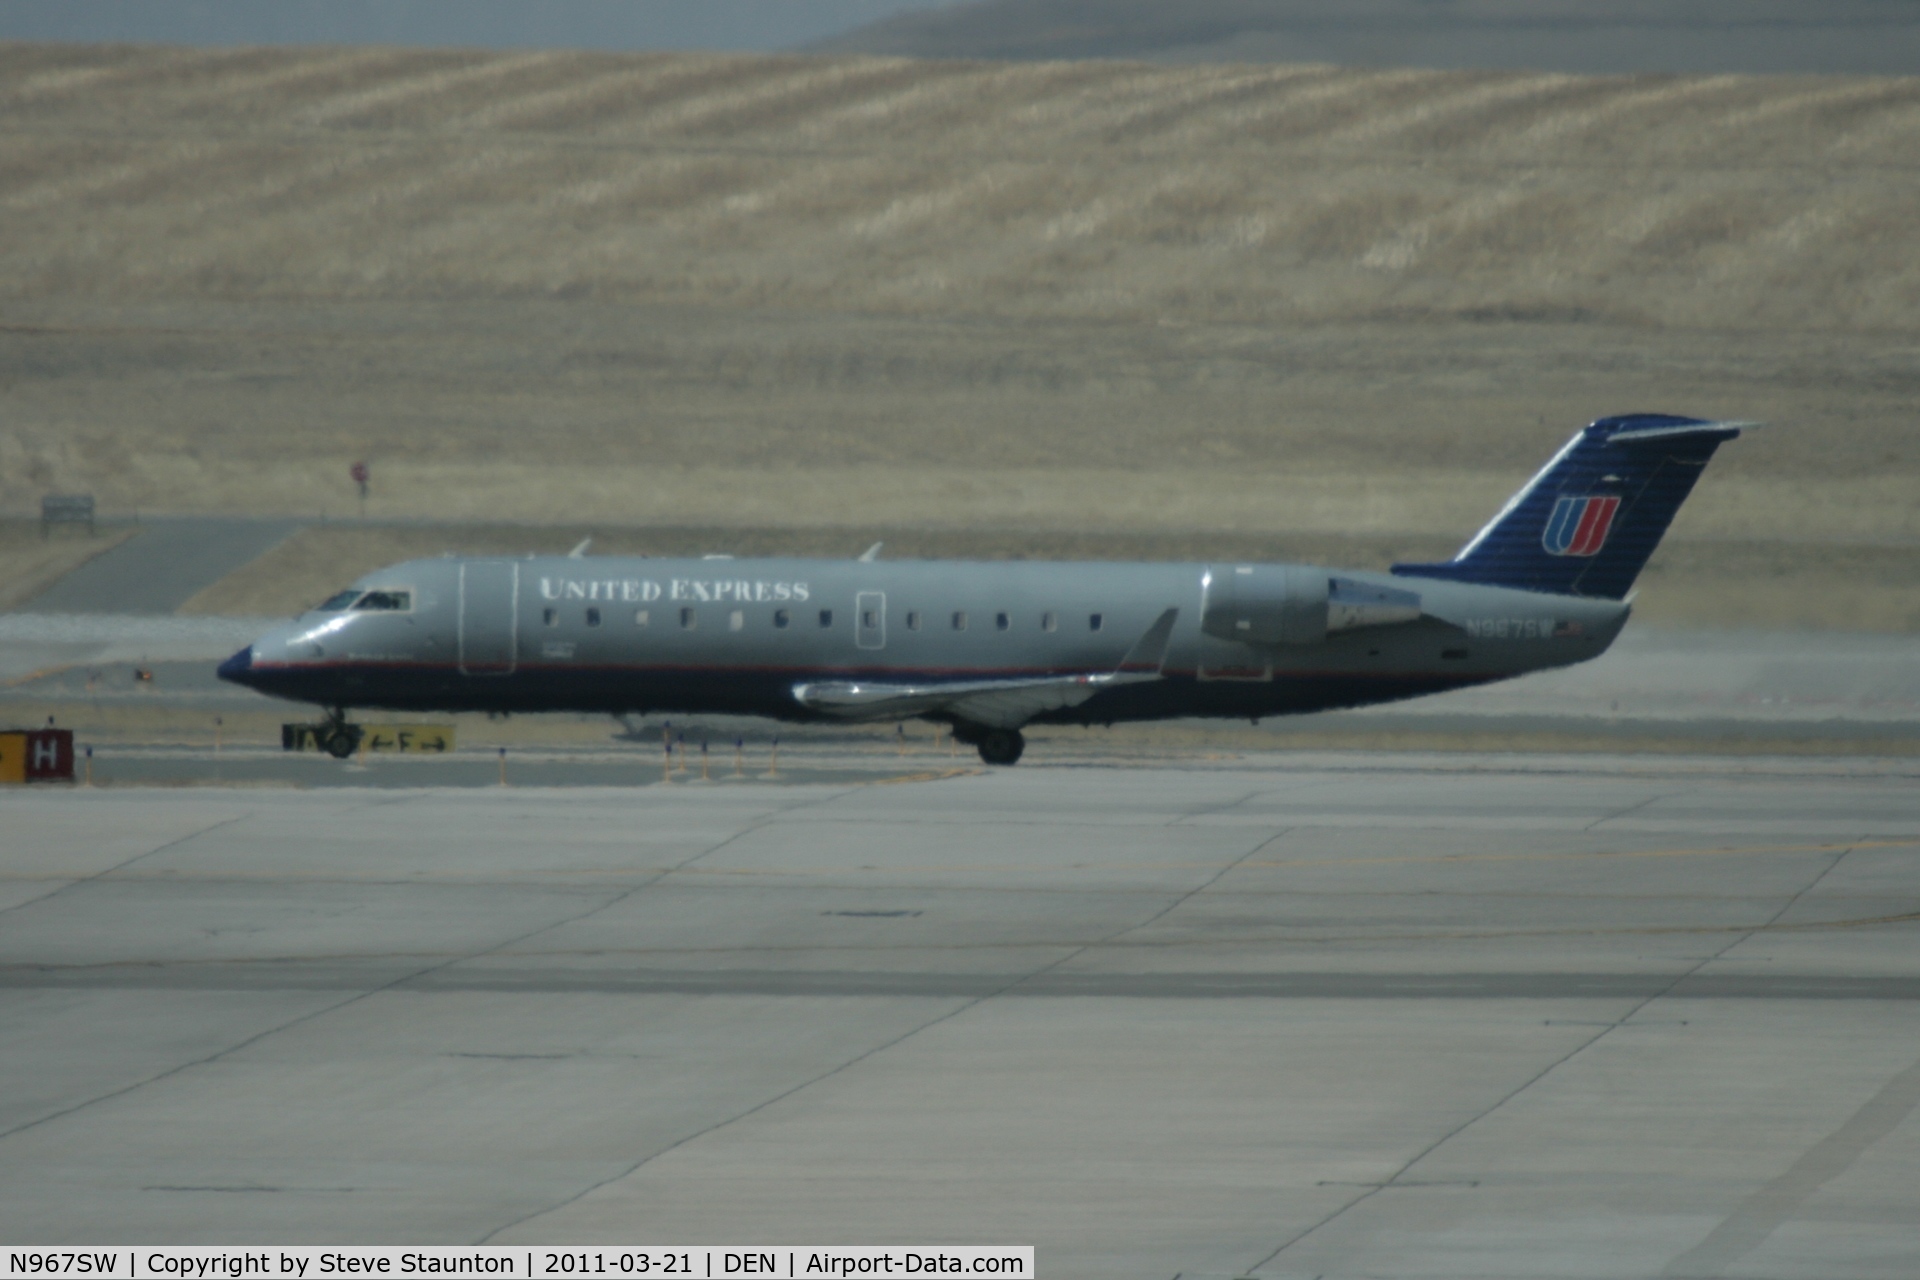 N967SW, 2003 Bombardier CRJ-200ER (CL-600-2B19) C/N 7872, Taken at Denver International Airport, in March 2011 whilst on an Aeroprint Aviation tour